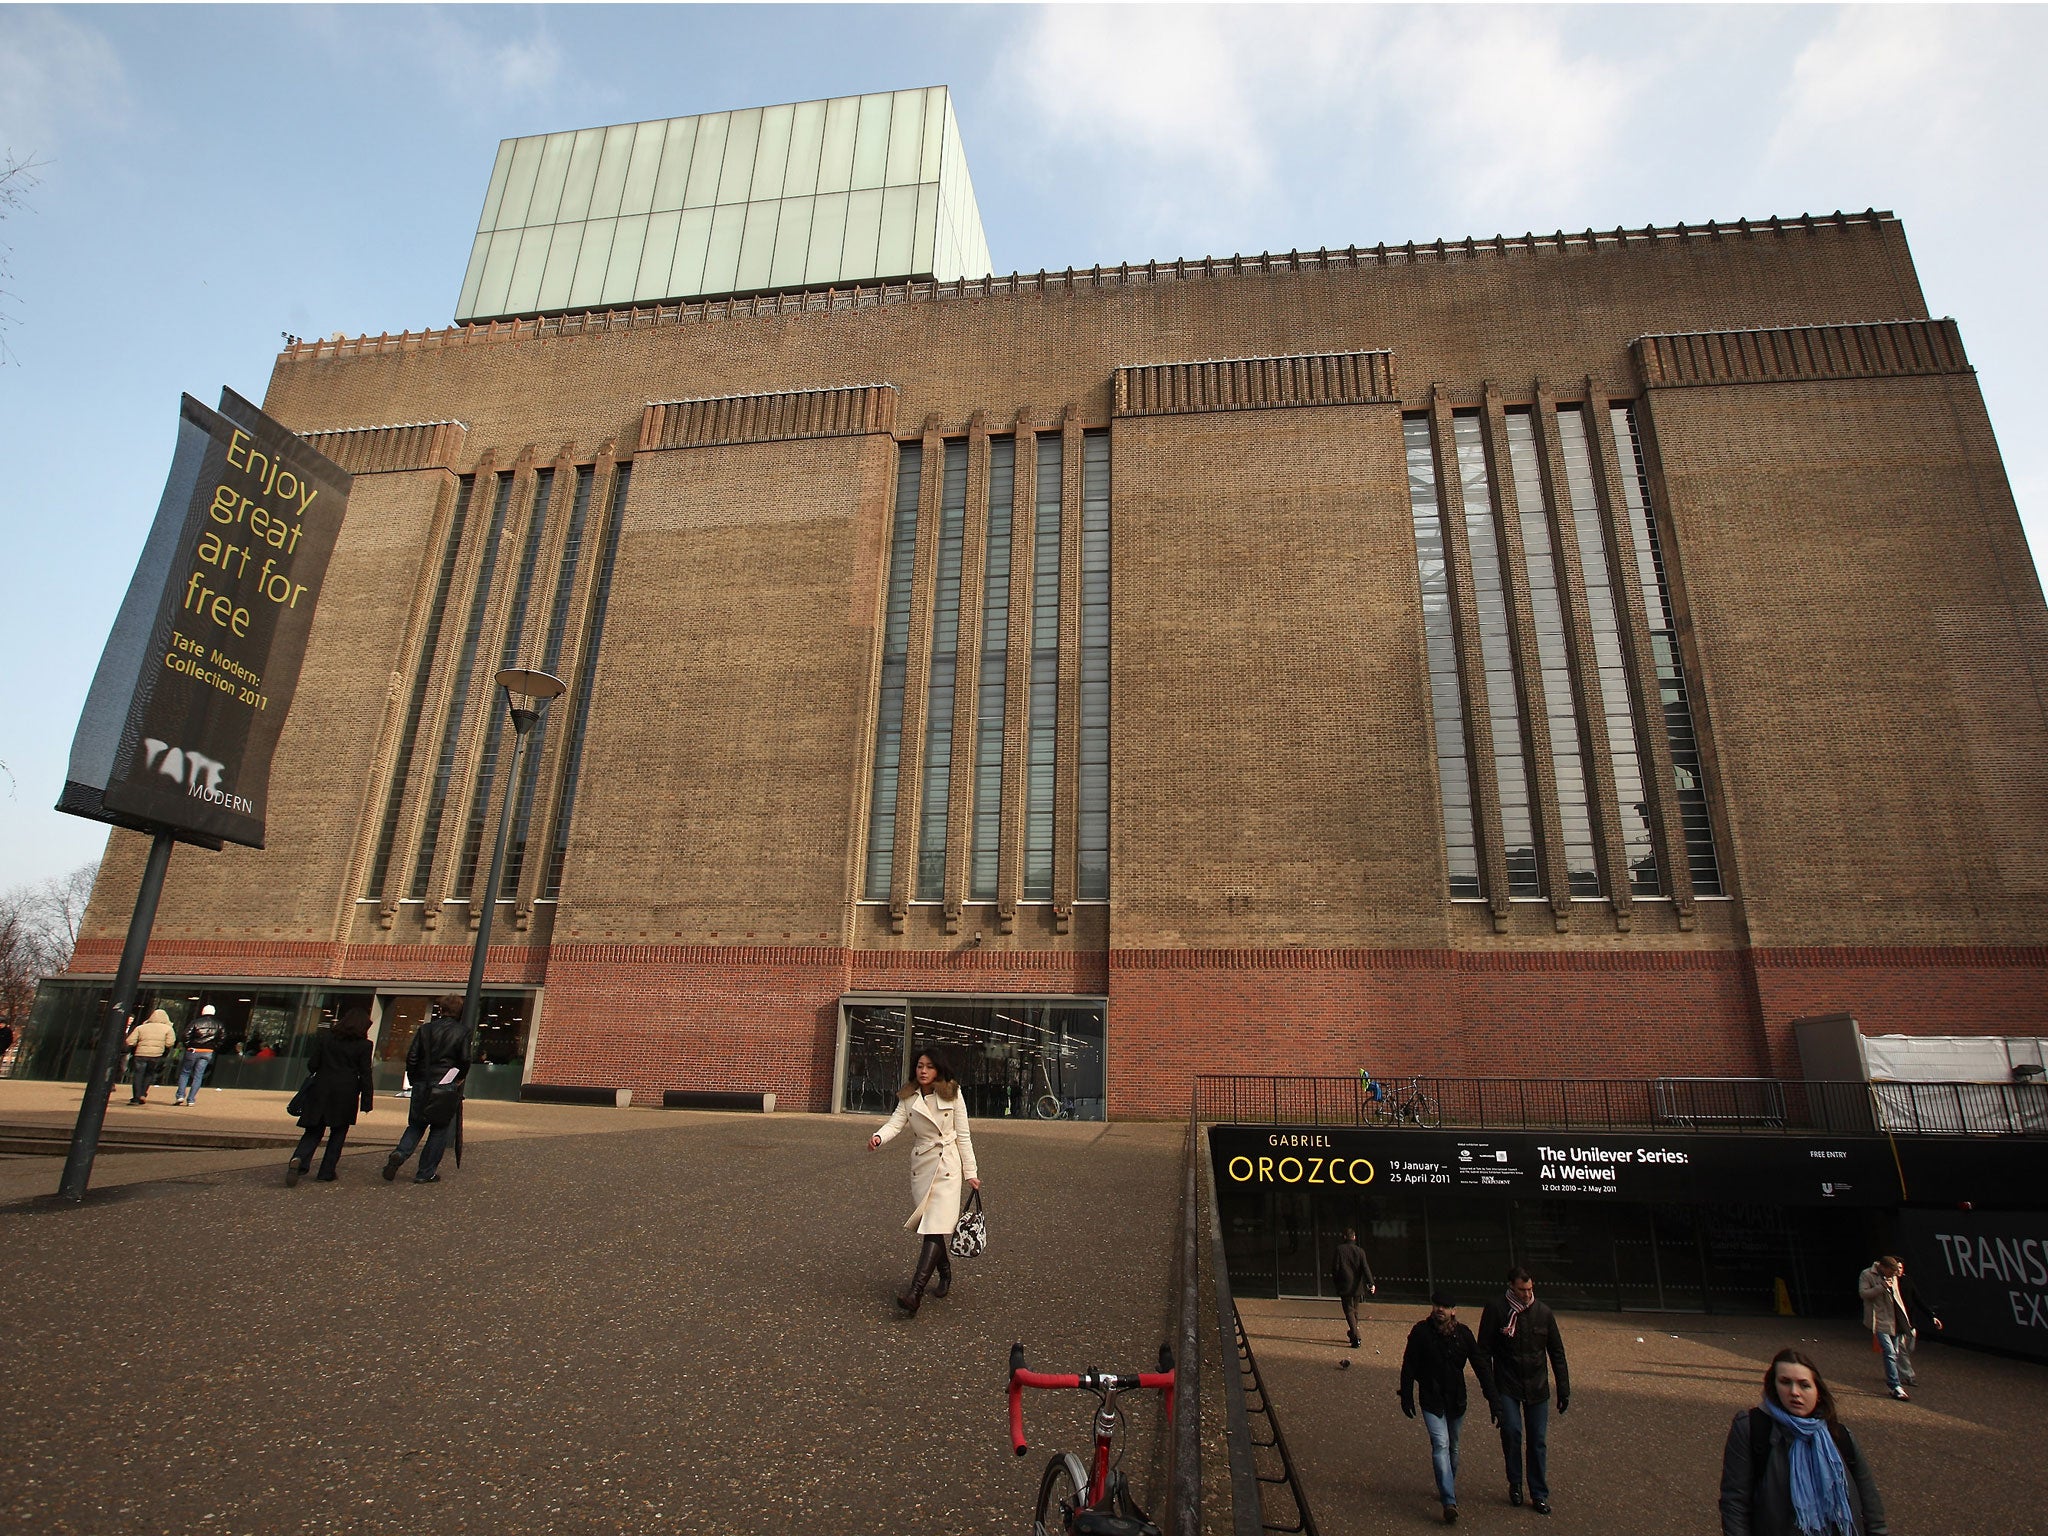 Tate Modern on March 2, 2011 in London, England.